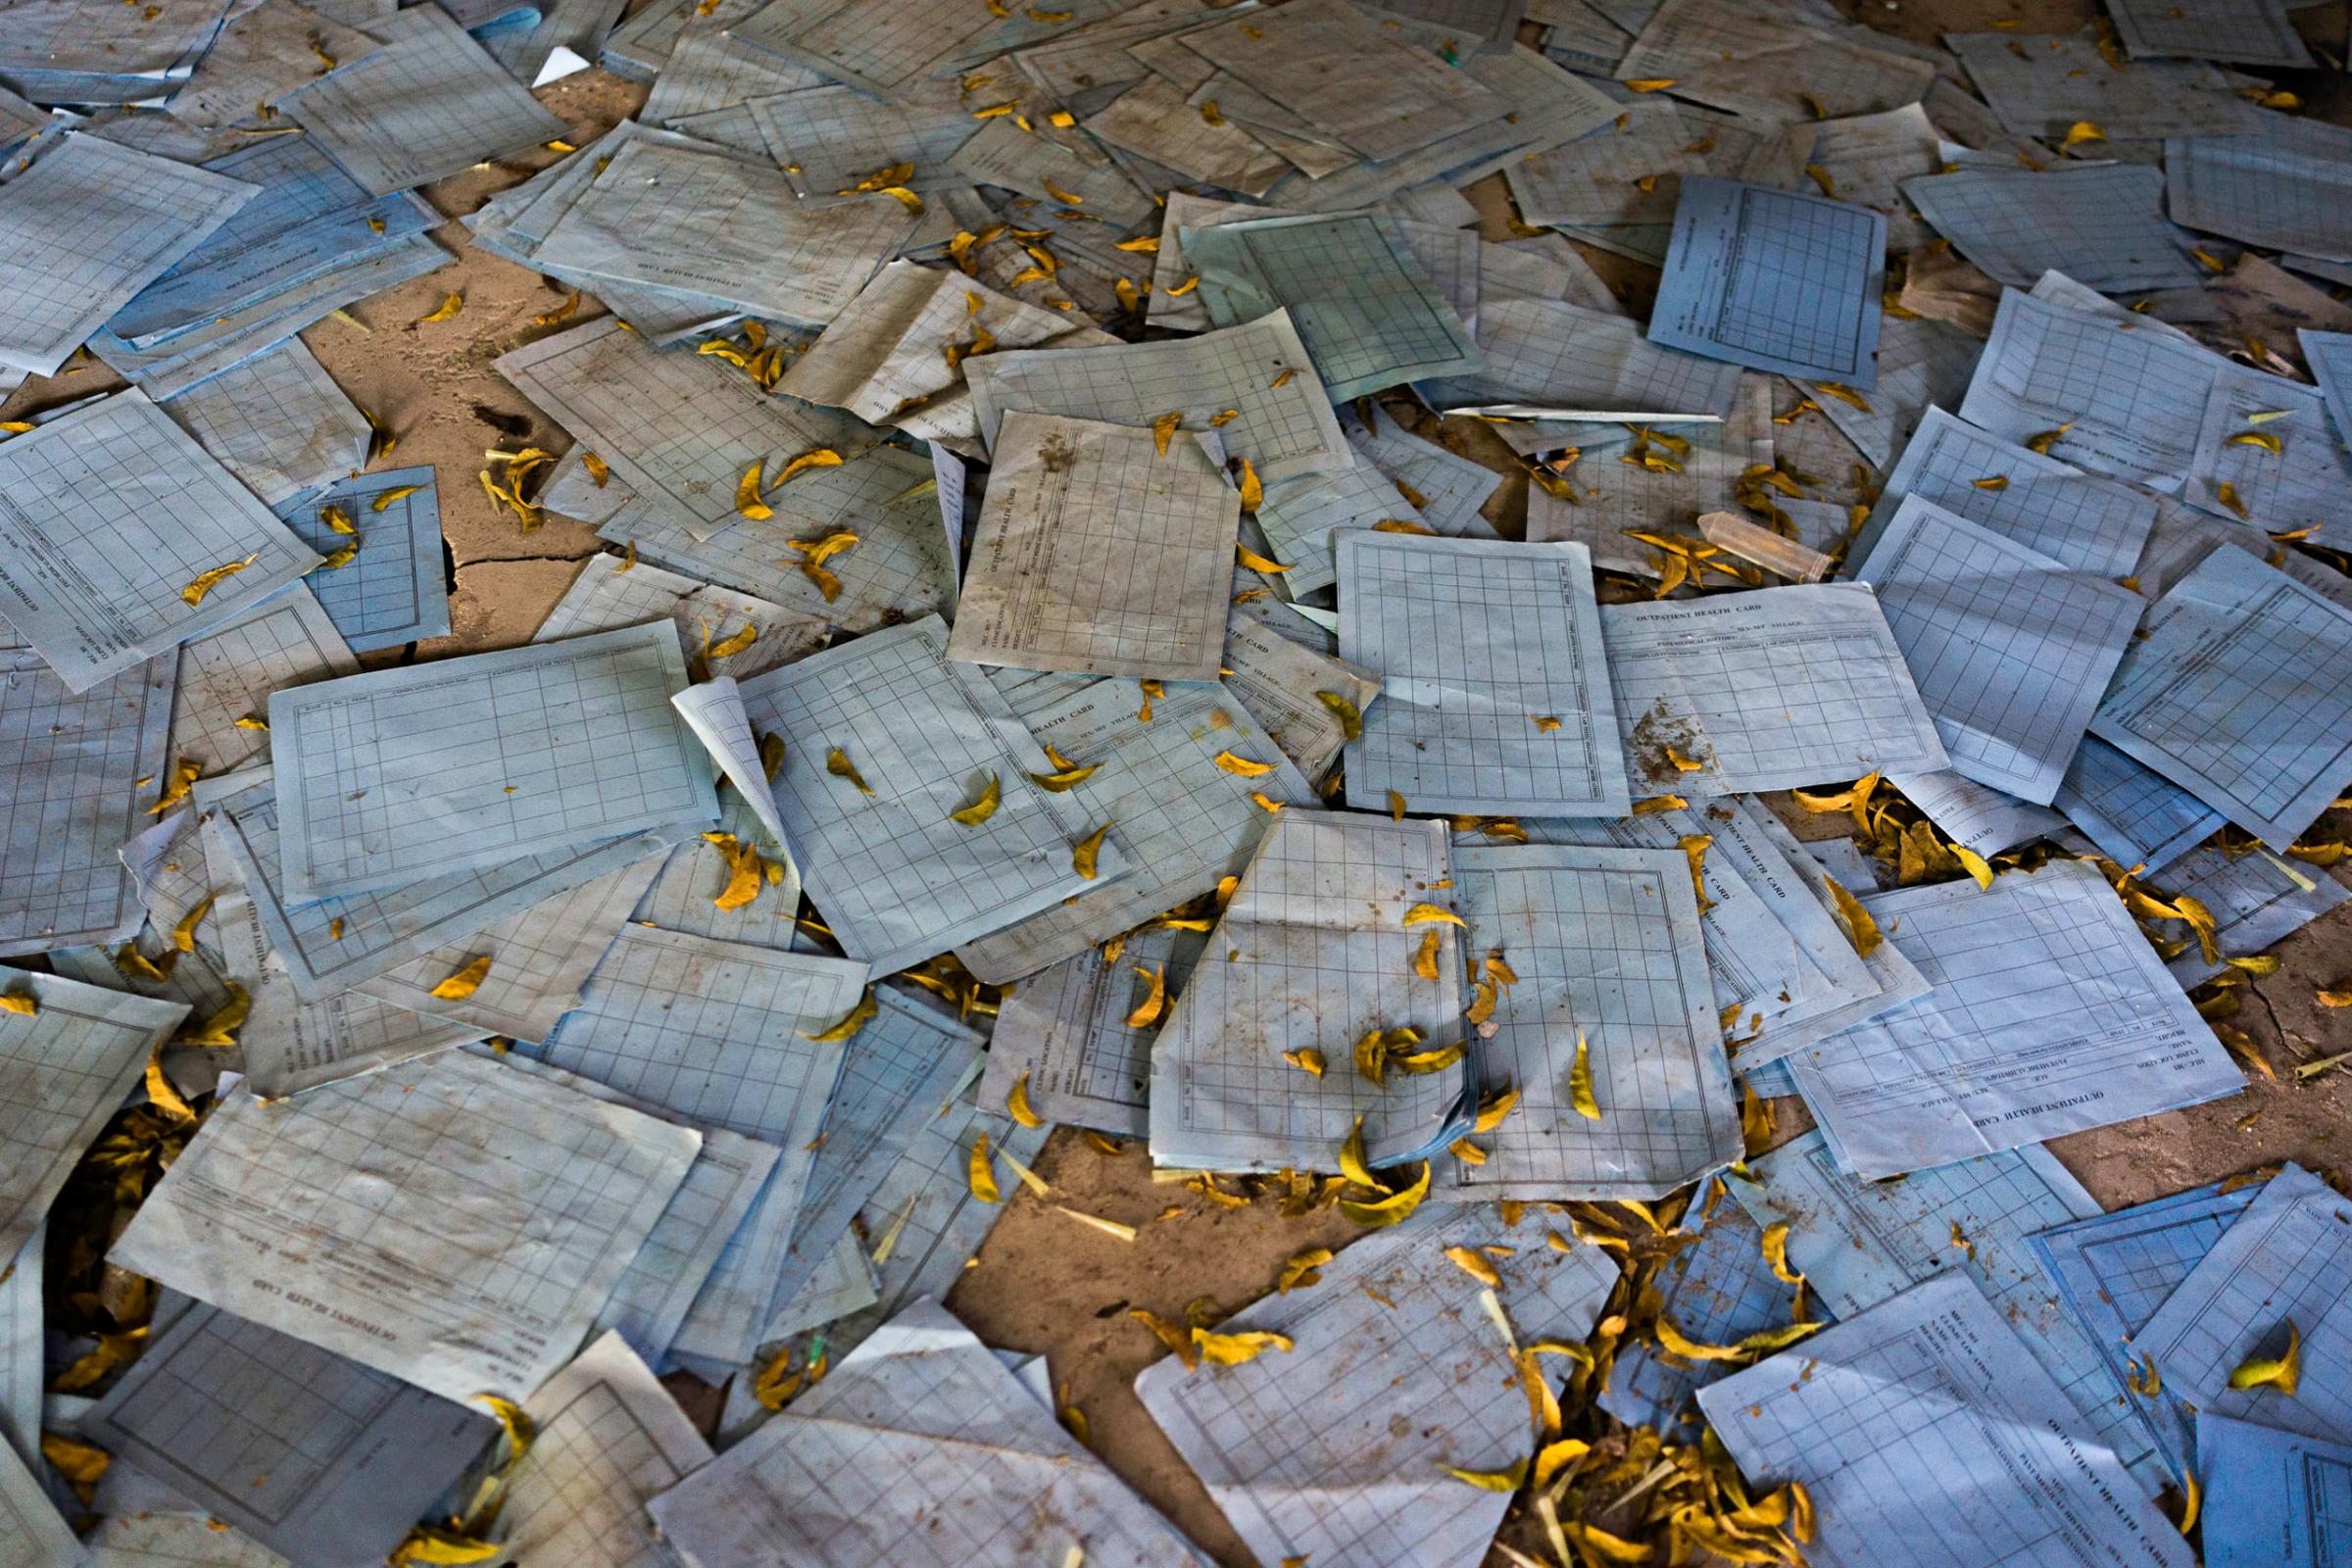 Medical charts are scattered on the ground inside the looted and abandoned Doctors Without Borders hospital in Leer, Unity State, South Sudan.